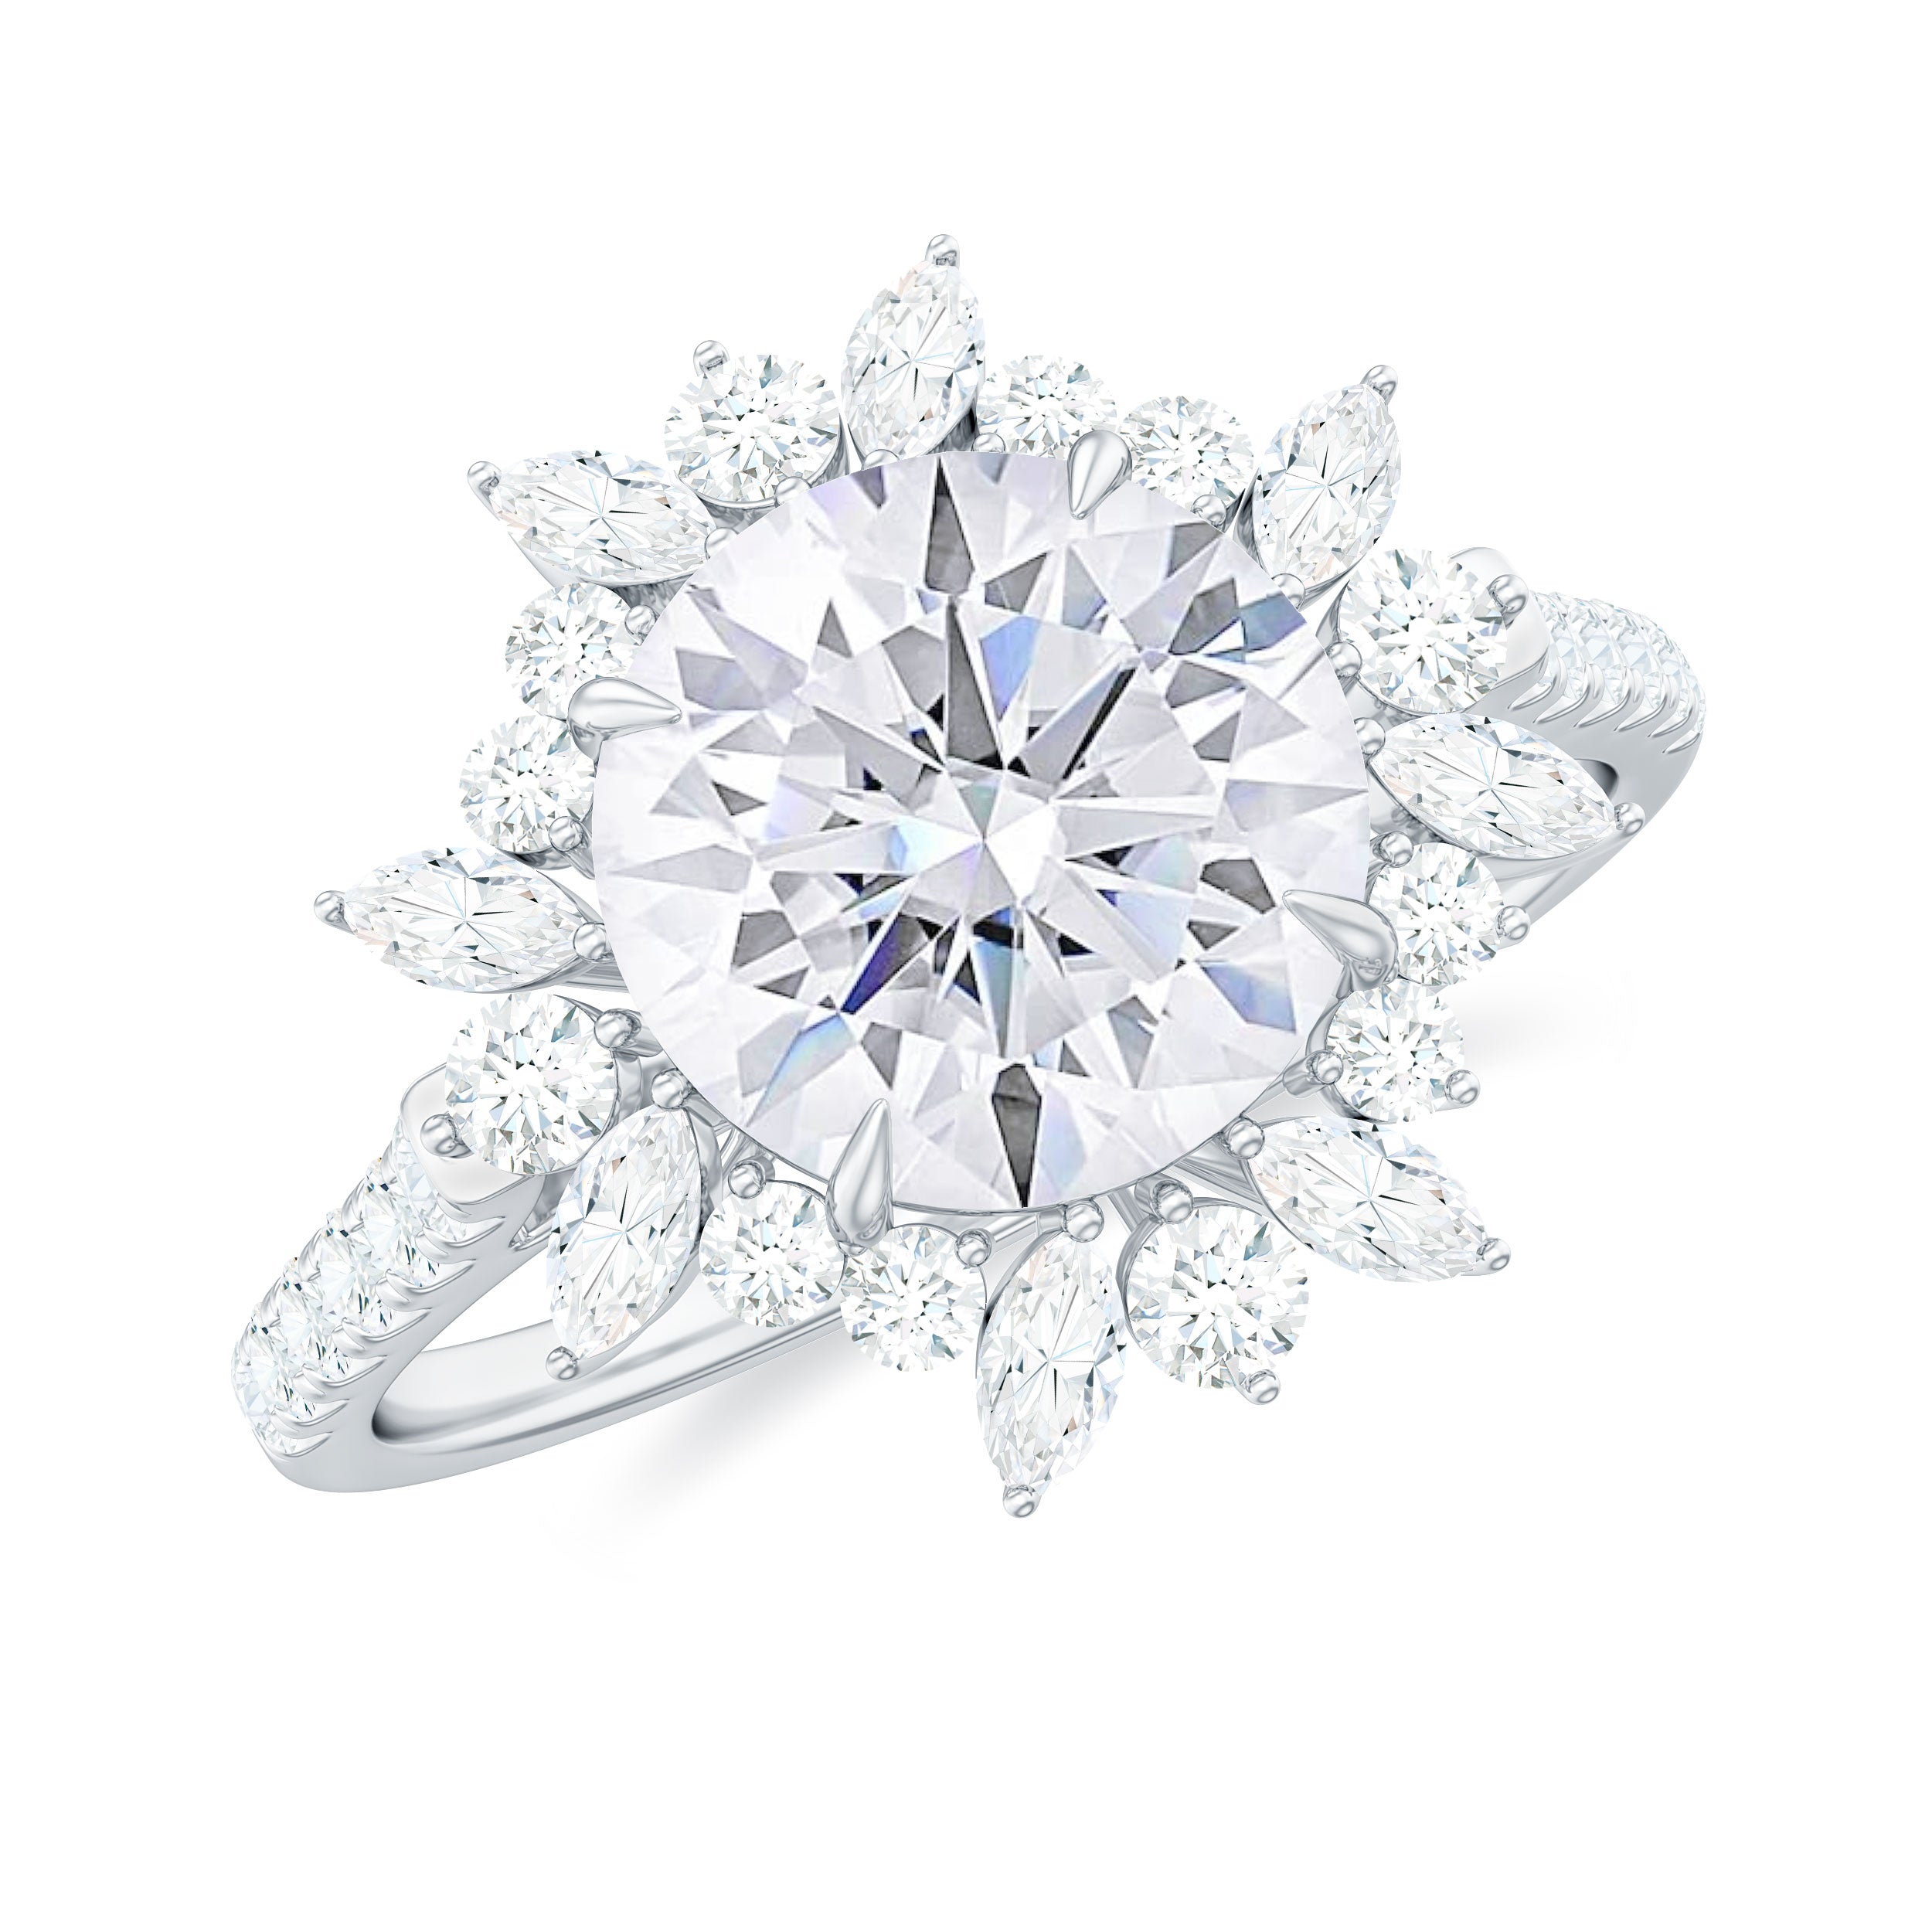 3.25 CT Certified Moissanite Flower Cocktail Ring in Gold Moissanite - ( D-VS1 ) - Color and Clarity - Rosec Jewels